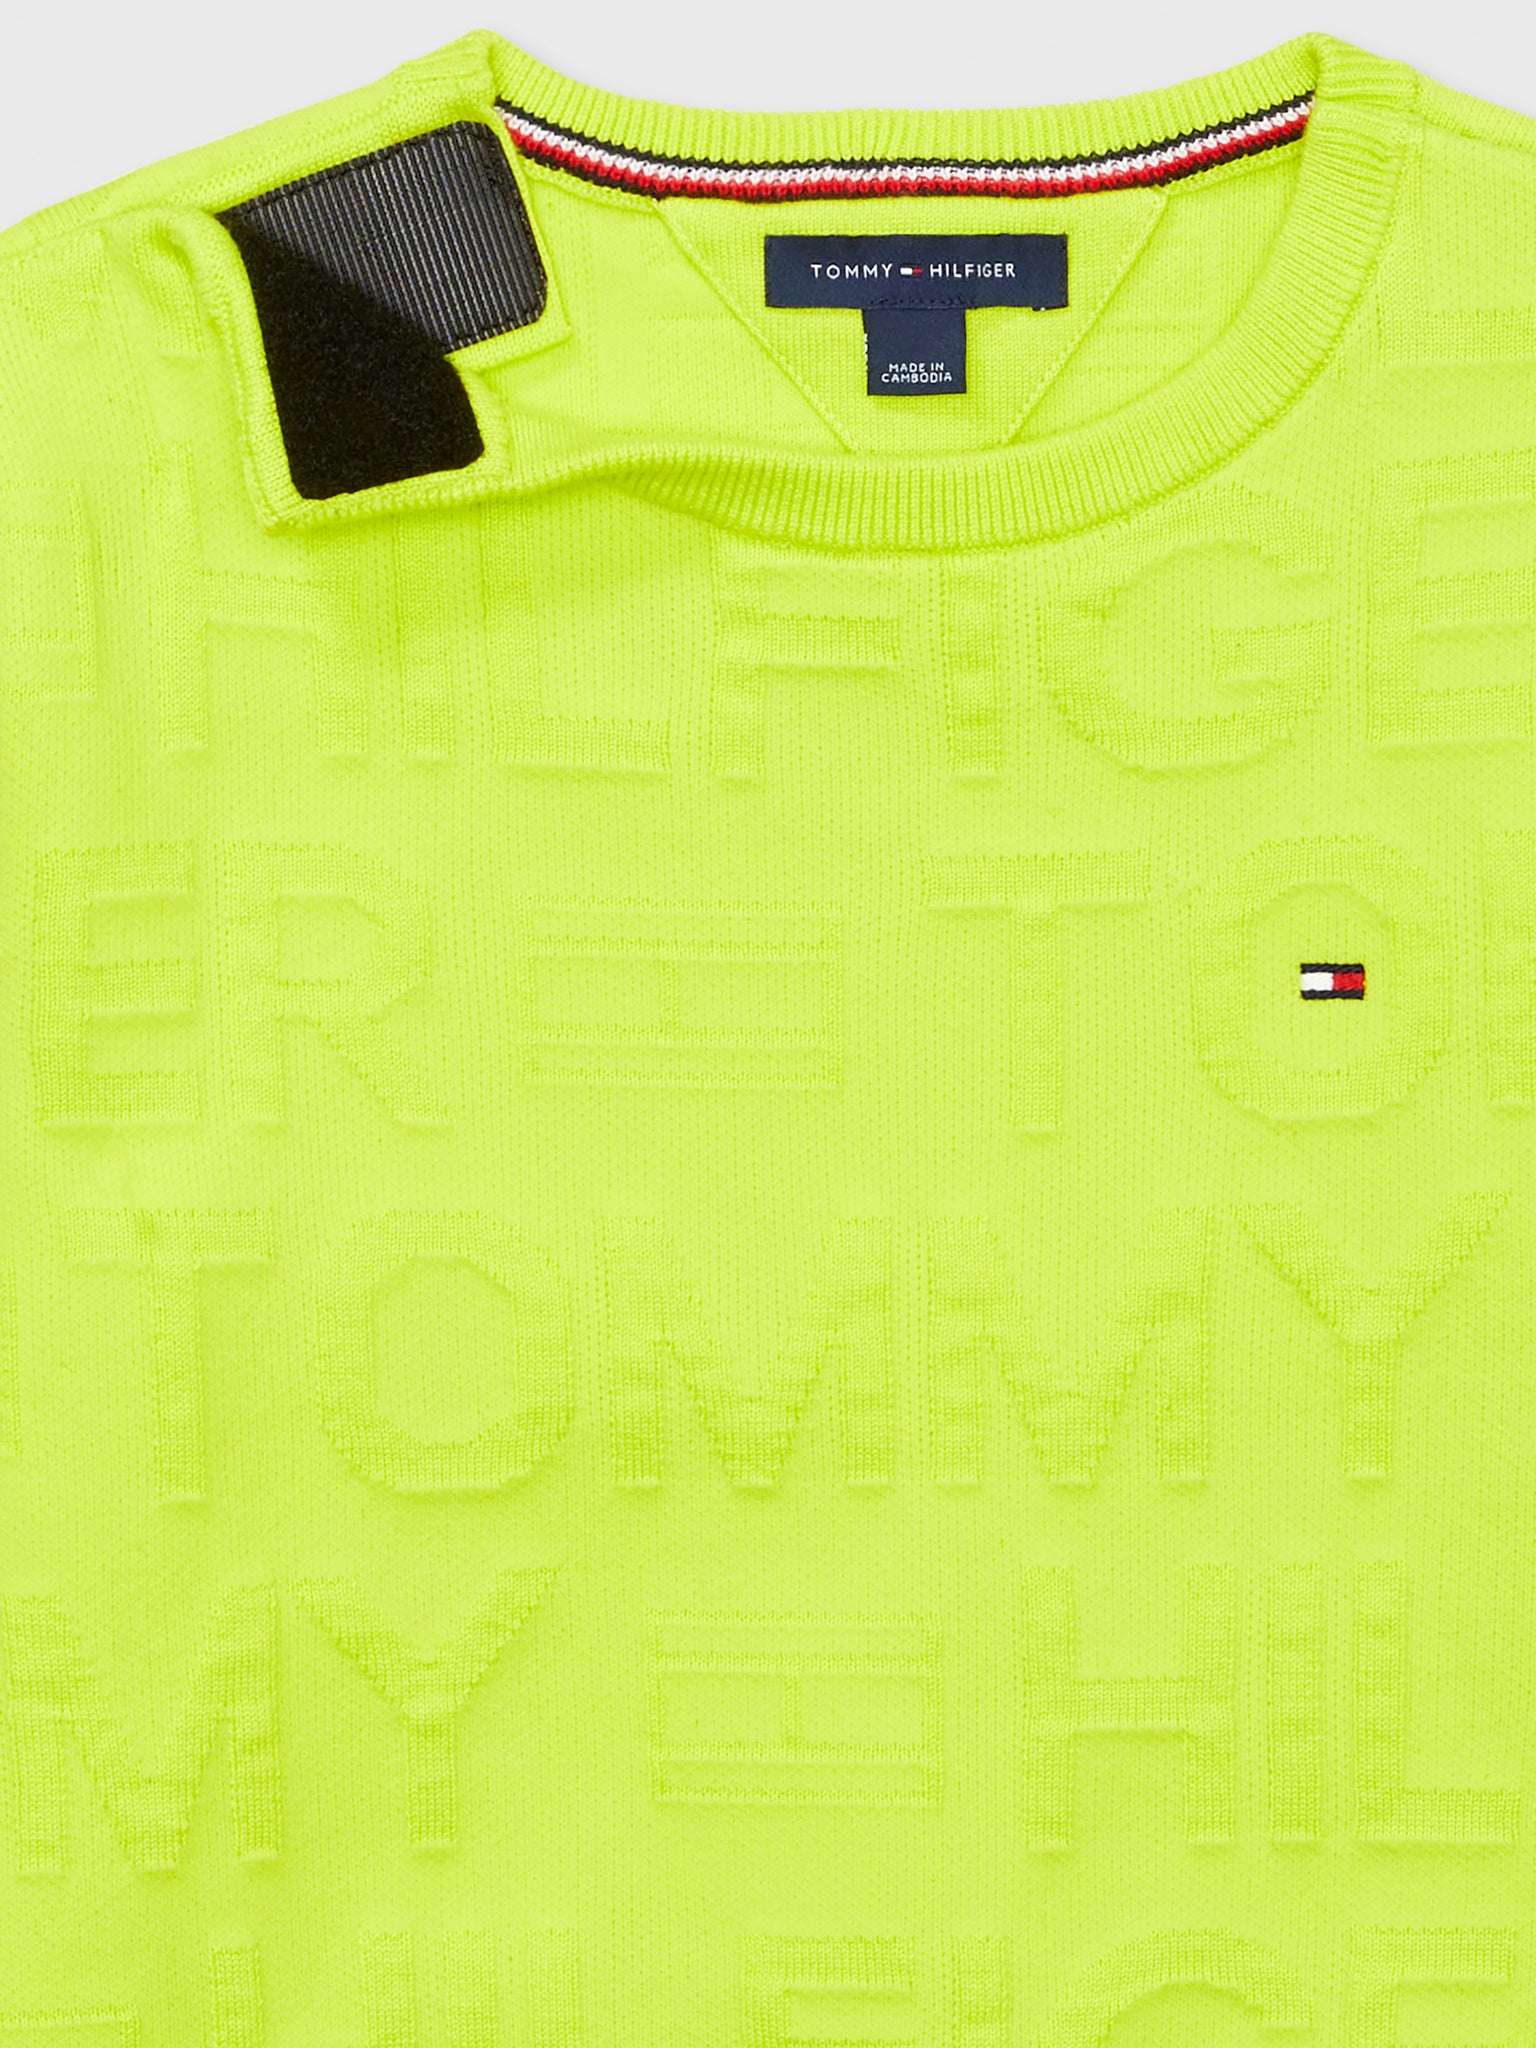 Tommy Jacquard Sweater (Kids) - Neo Lime